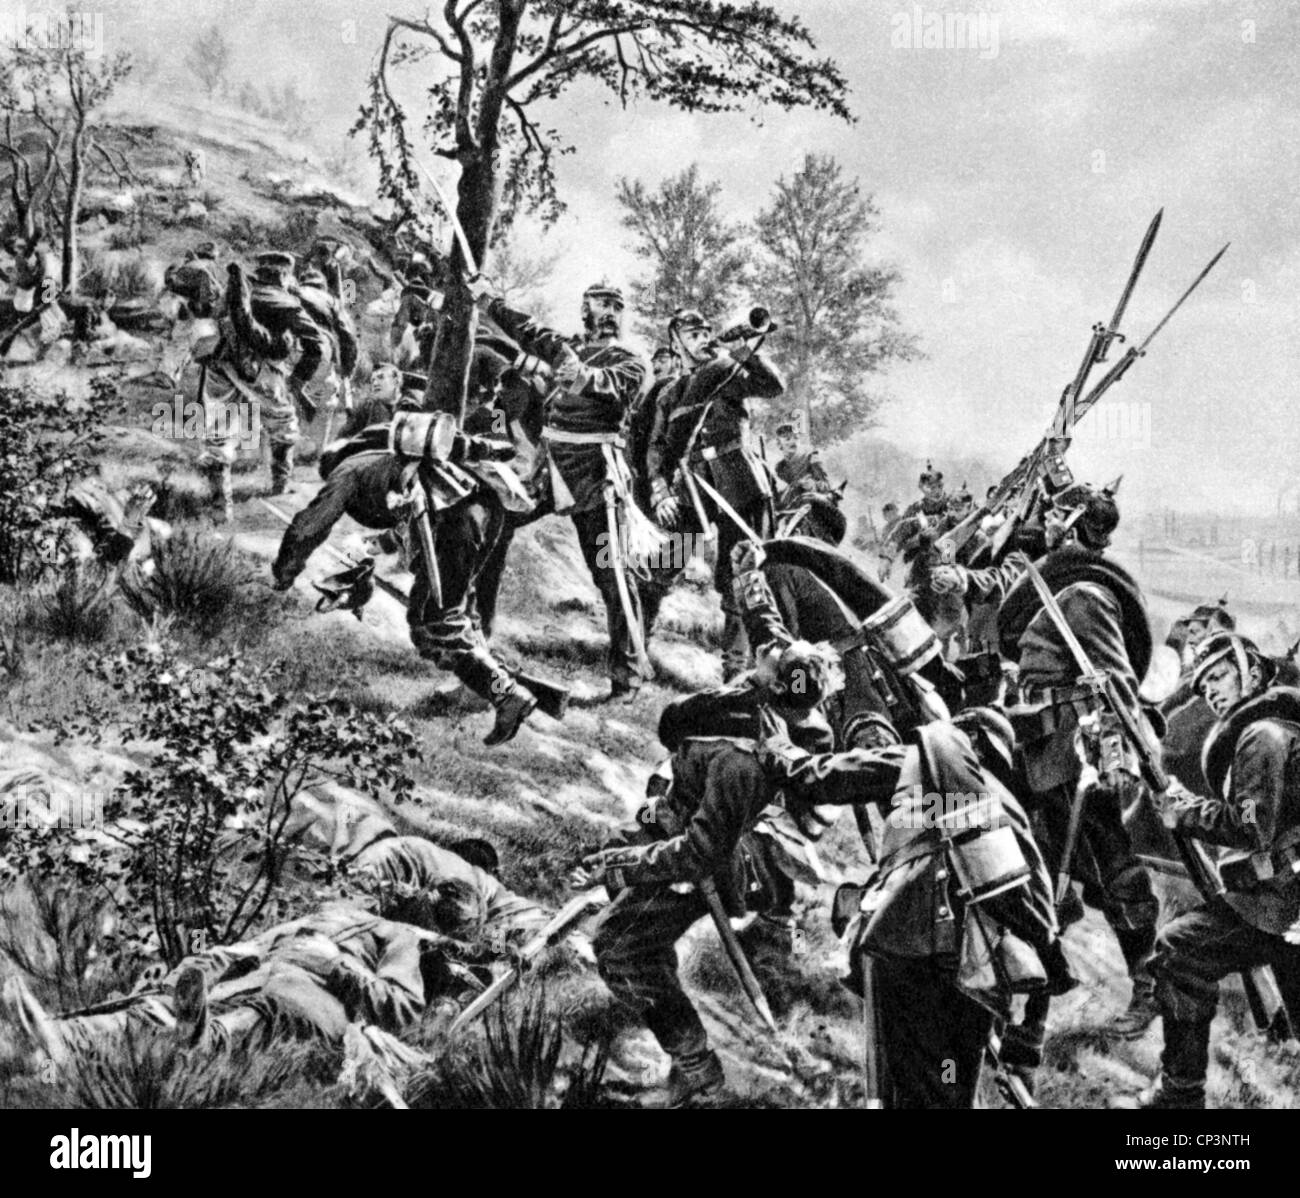 events, Franco-Prussian War 1870 - 1871, Battle of Spichern, 6.8.1870, general Bruno von Francois storming the Spichern Hights, print after painting by Anton von Werner, 1880, infantry, soldiers, German 1st Army, Prussians, attack, charge, Lorraine, Germany, France, Franco - Prussian, historic, historical, 19th century, people, Additional-Rights-Clearences-Not Available Stock Photo